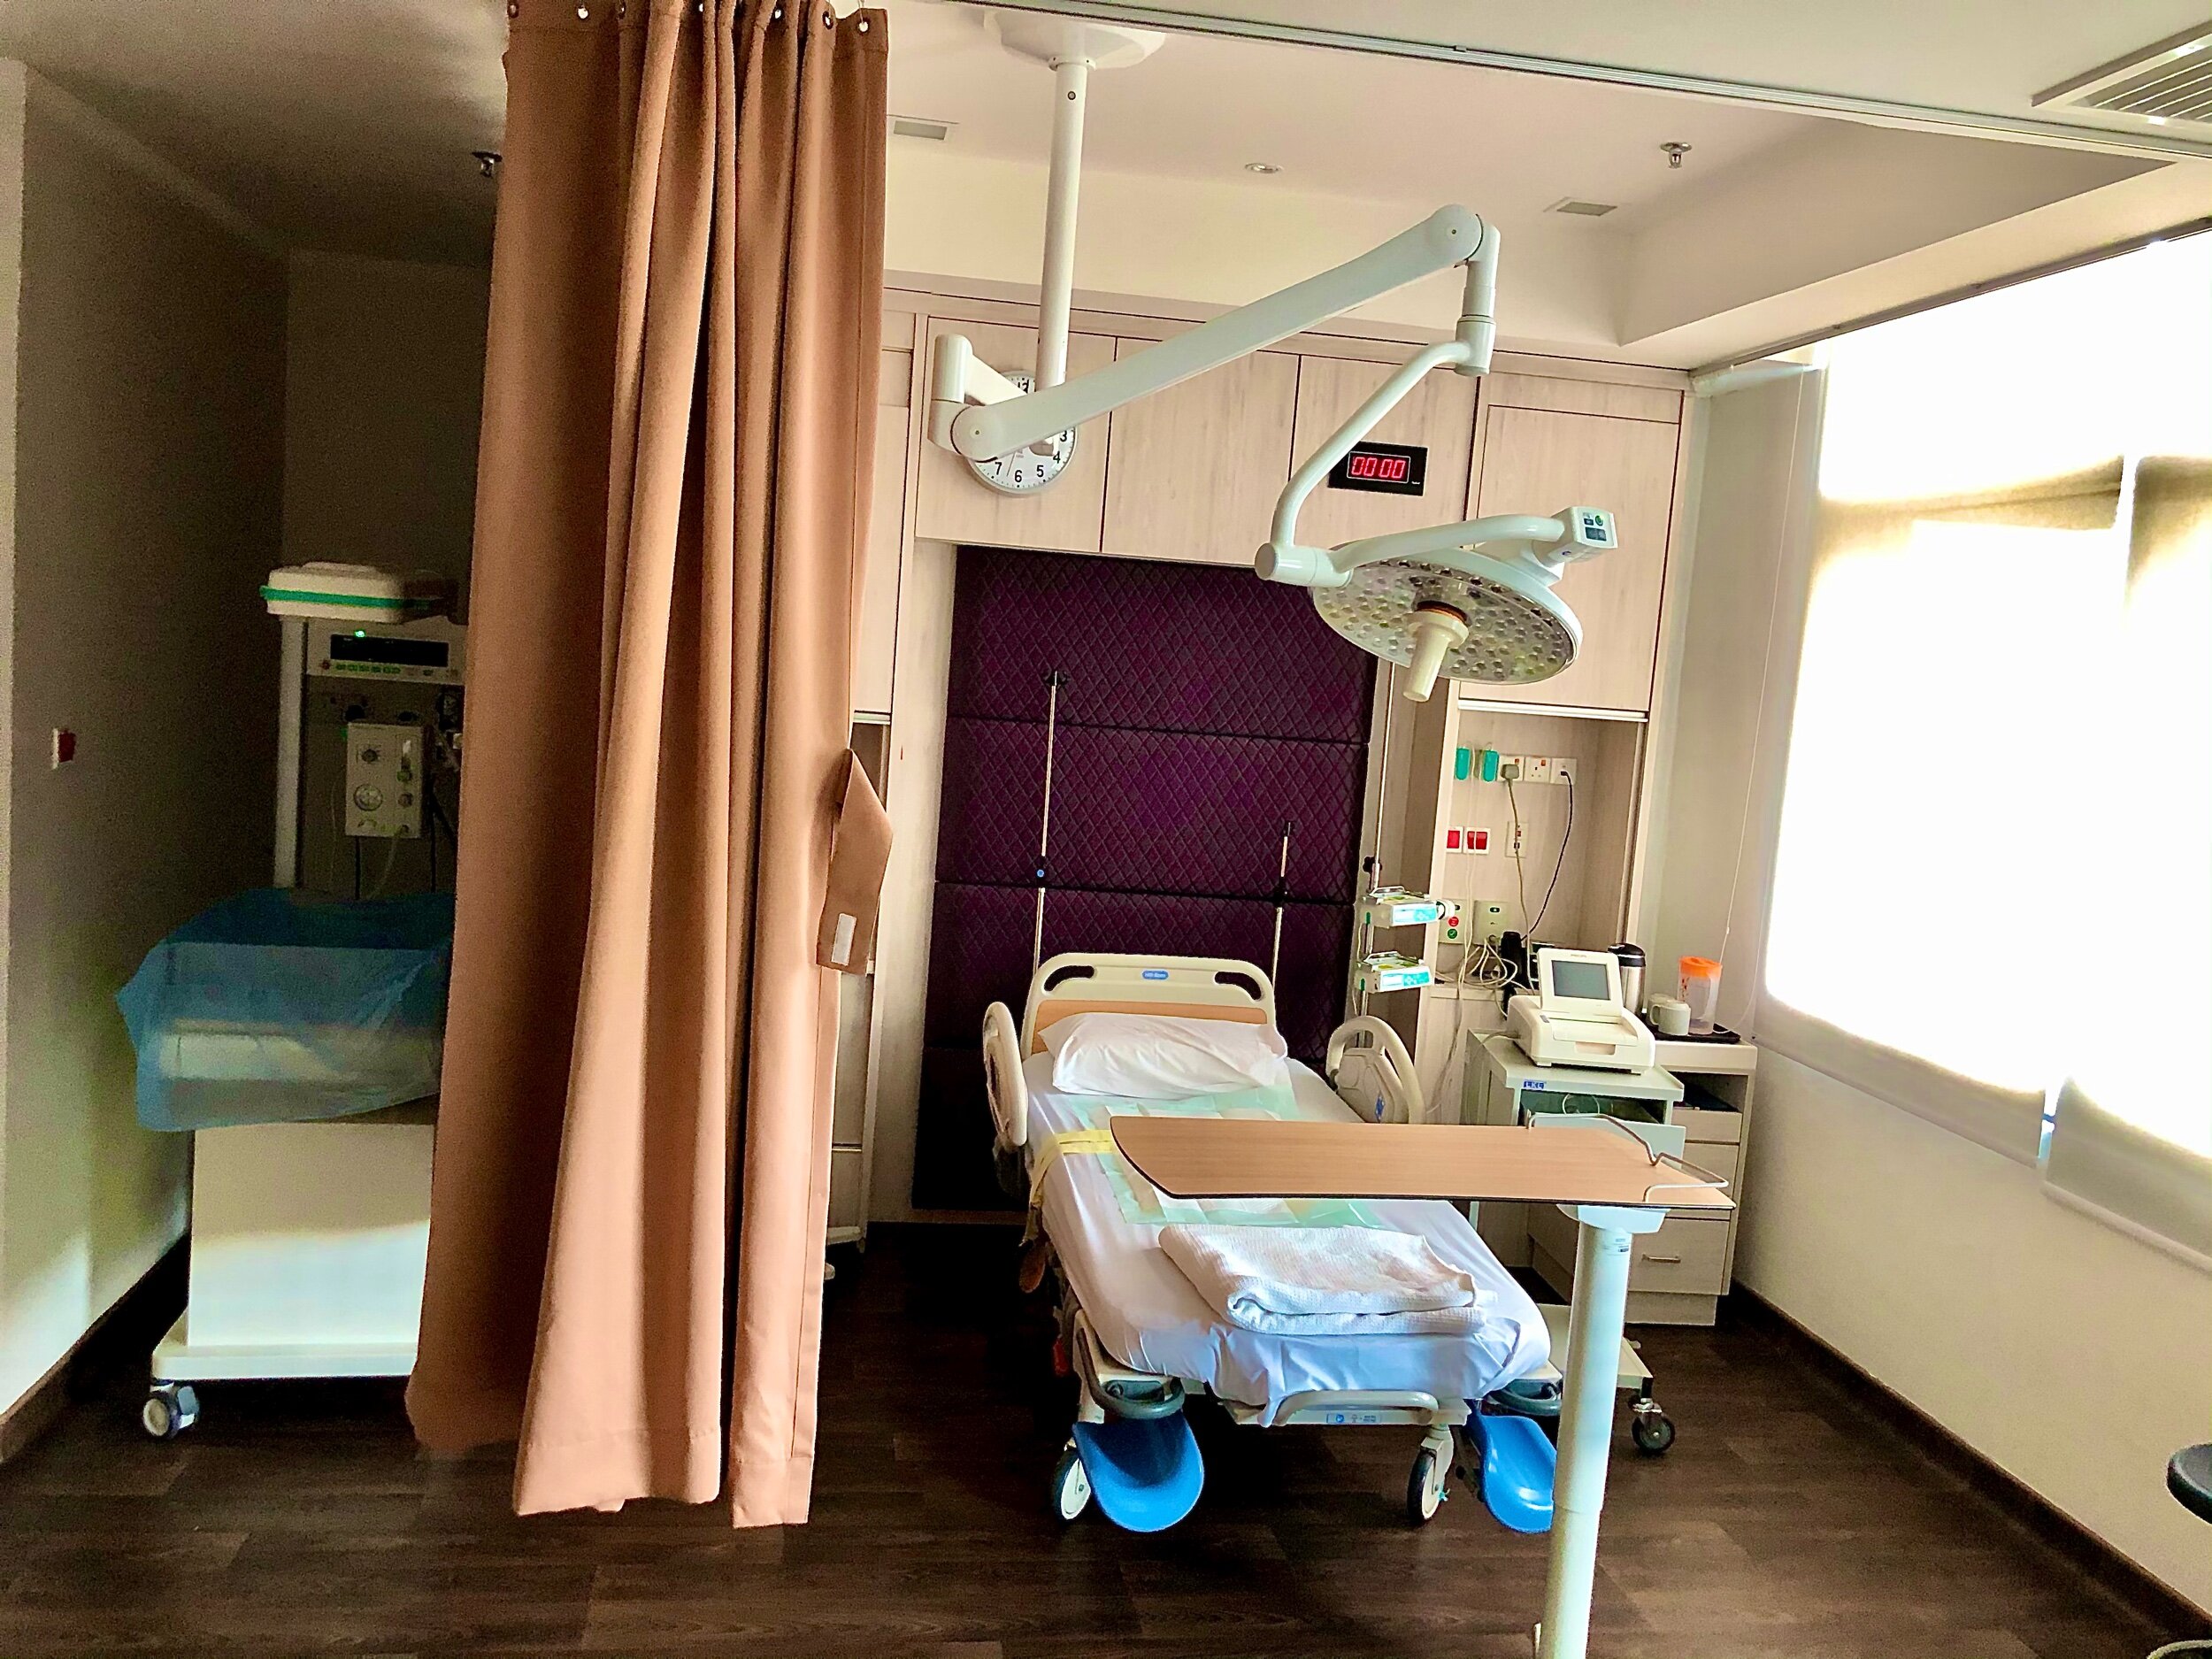 JOHOR BAHRU HAS A CHILDBIRTH EXPERIENCE WHERE YOU CAN EXPERIENCE